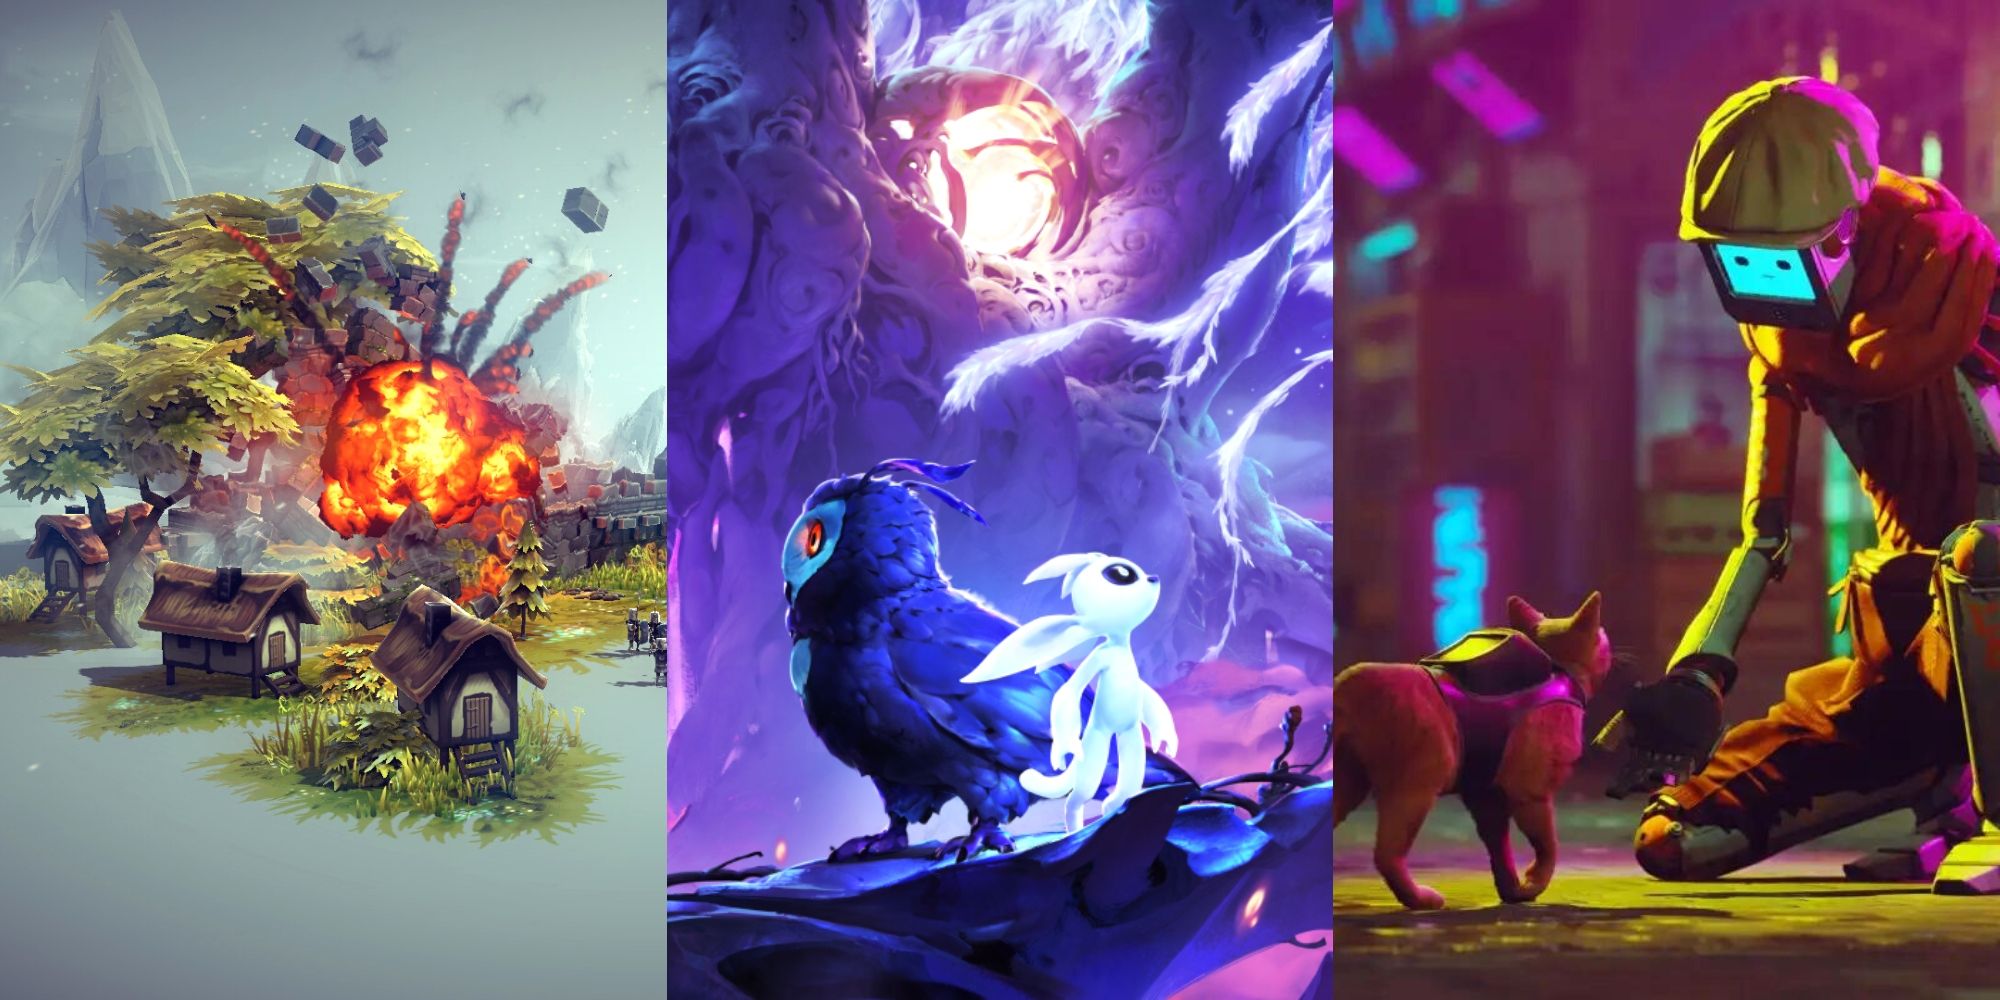 battle in Besiege, Ku and Ori in Ori and the Will of the Wisps, cat and robot in Stray